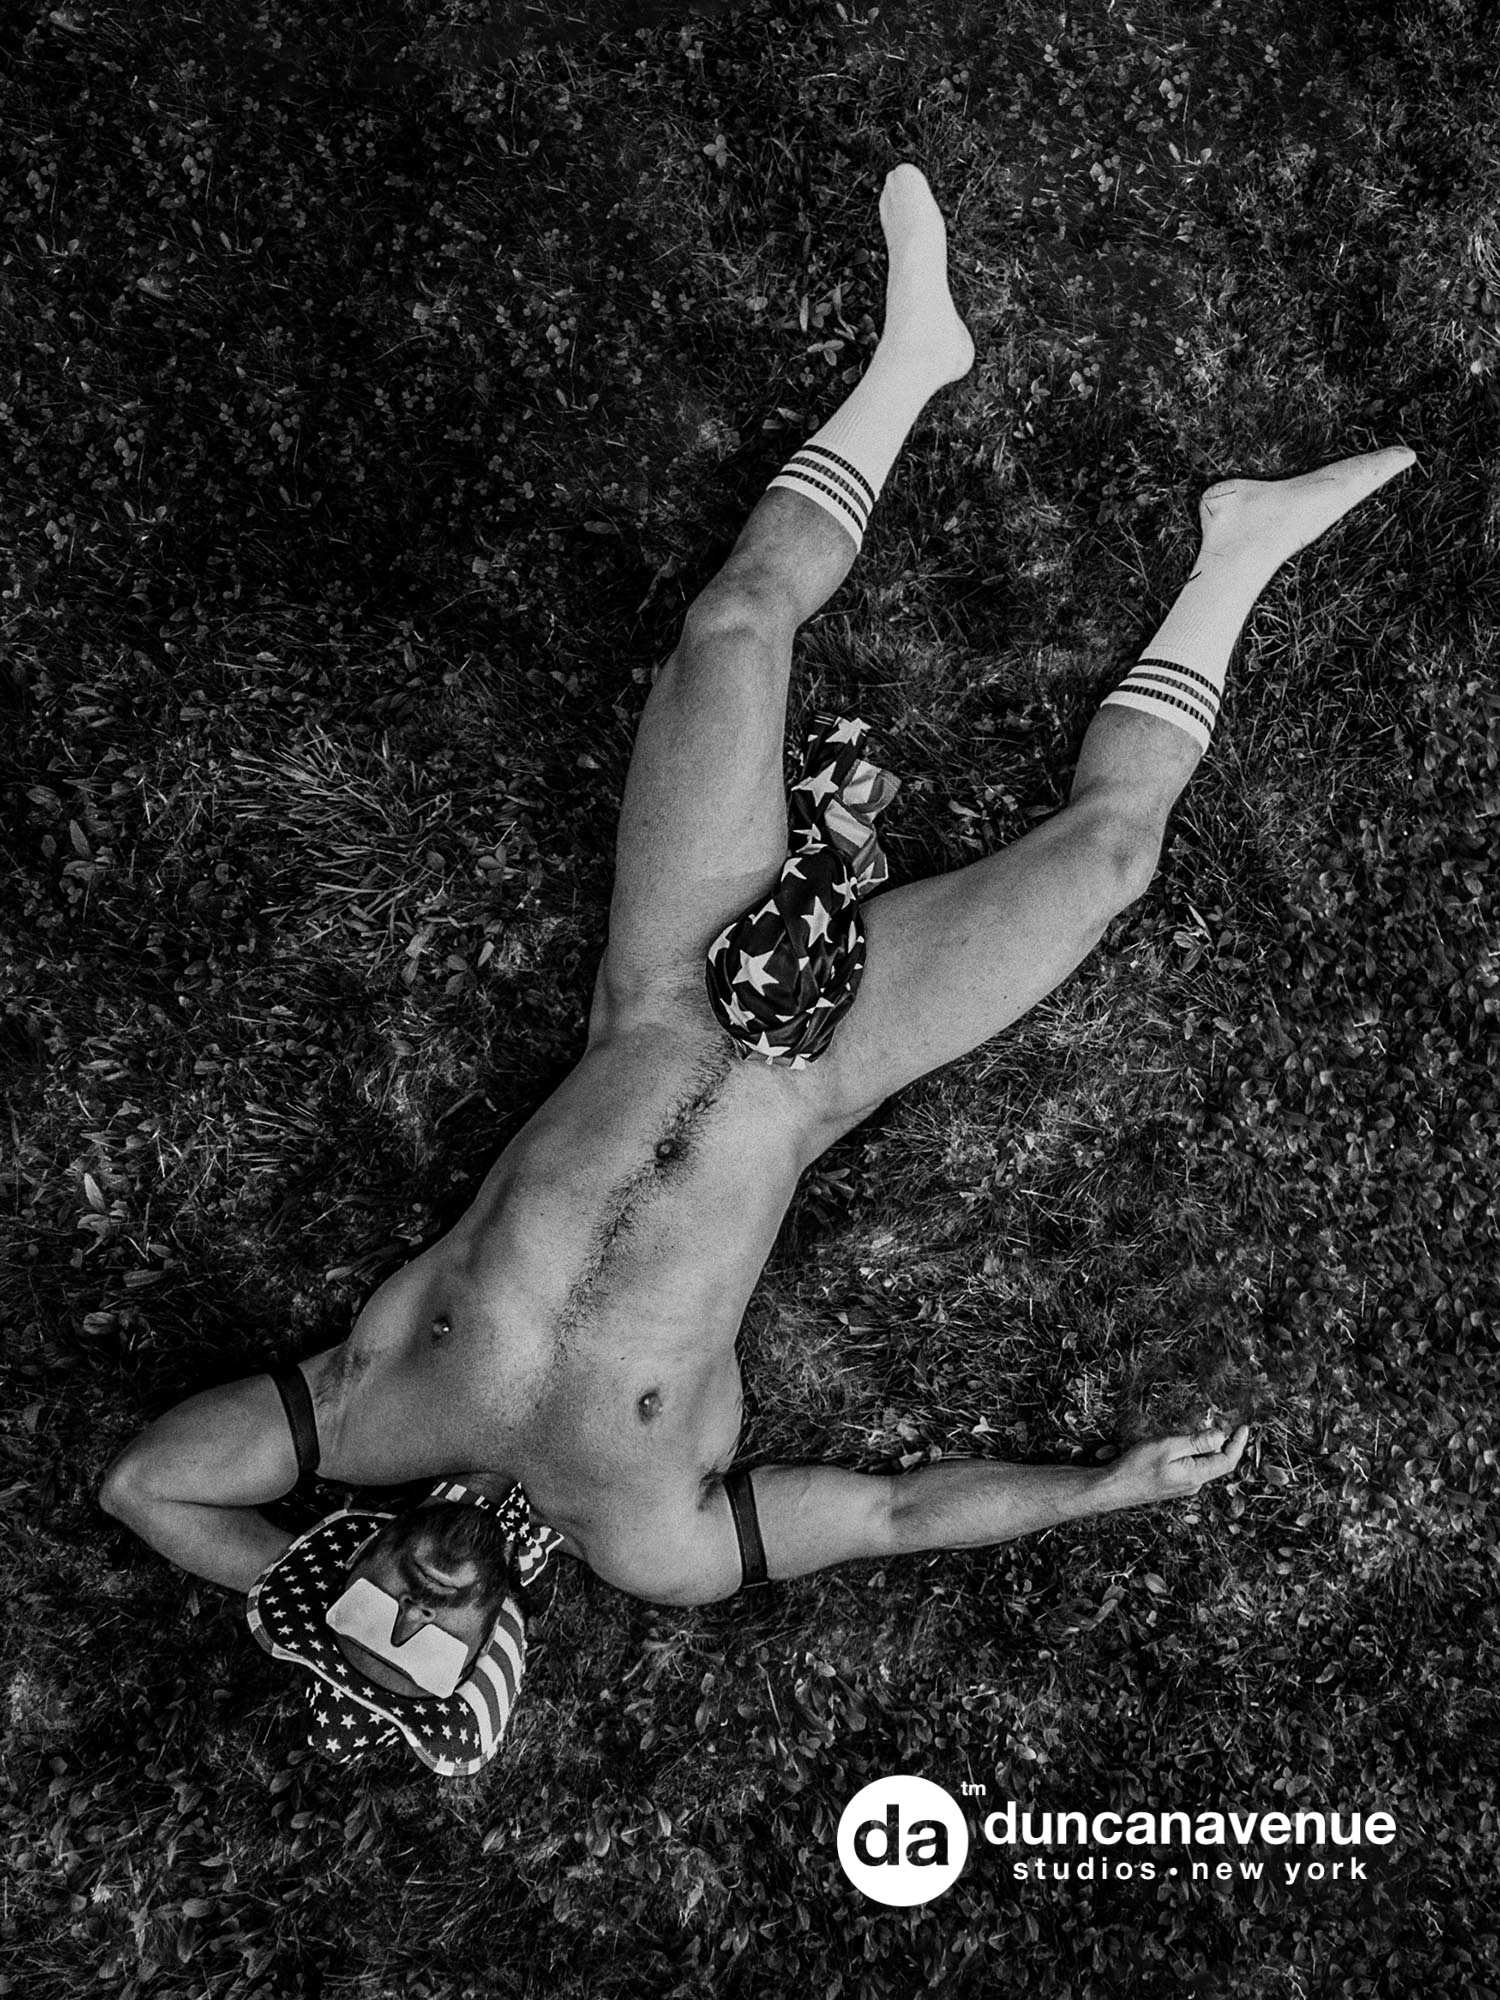 "American Wilderness: Untamed" - A Pioneering Chapter in NYC Male Boudoir Experience with Photographer Maxwell Alexander